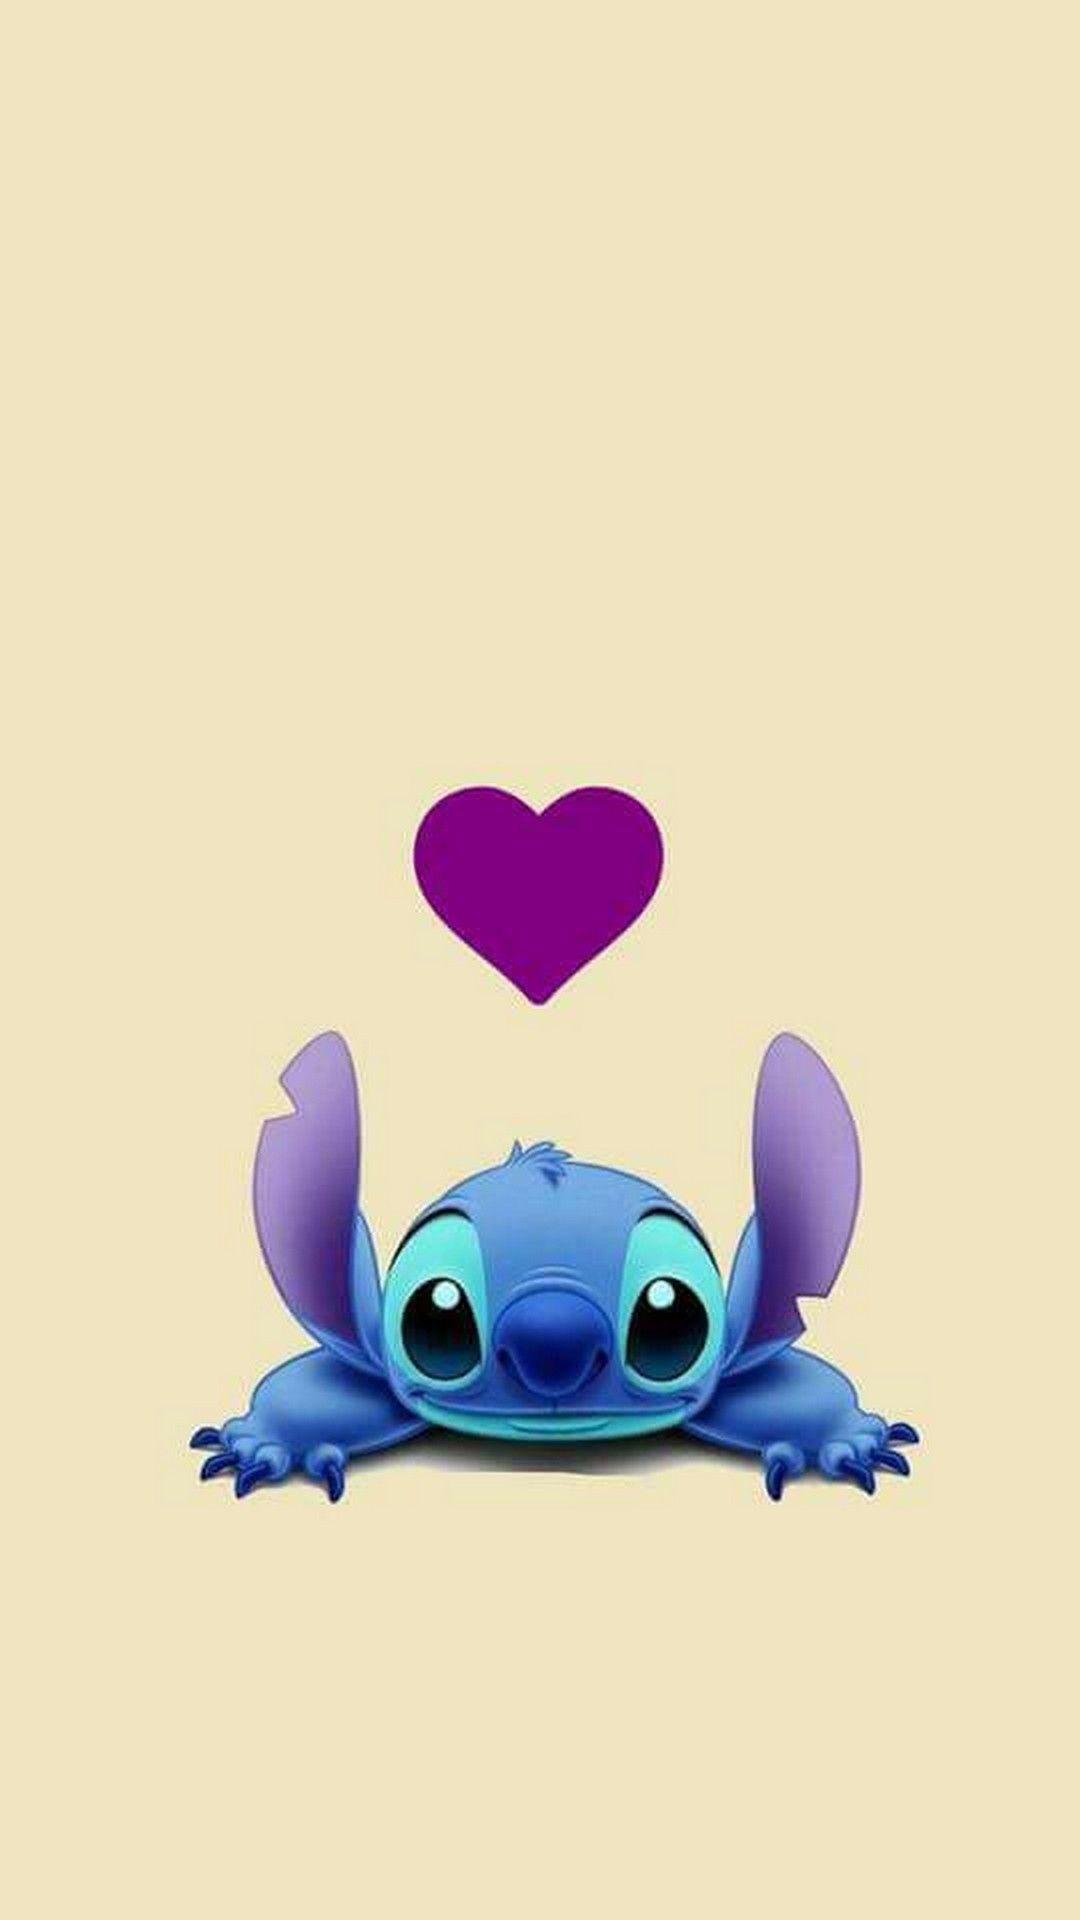 Stitch iPhone Wallpaper HD is best high definition wallpaper image 2018. You can use this wallp. Cute disney wallpaper, Cute cartoon wallpaper, Cartoon wallpaper